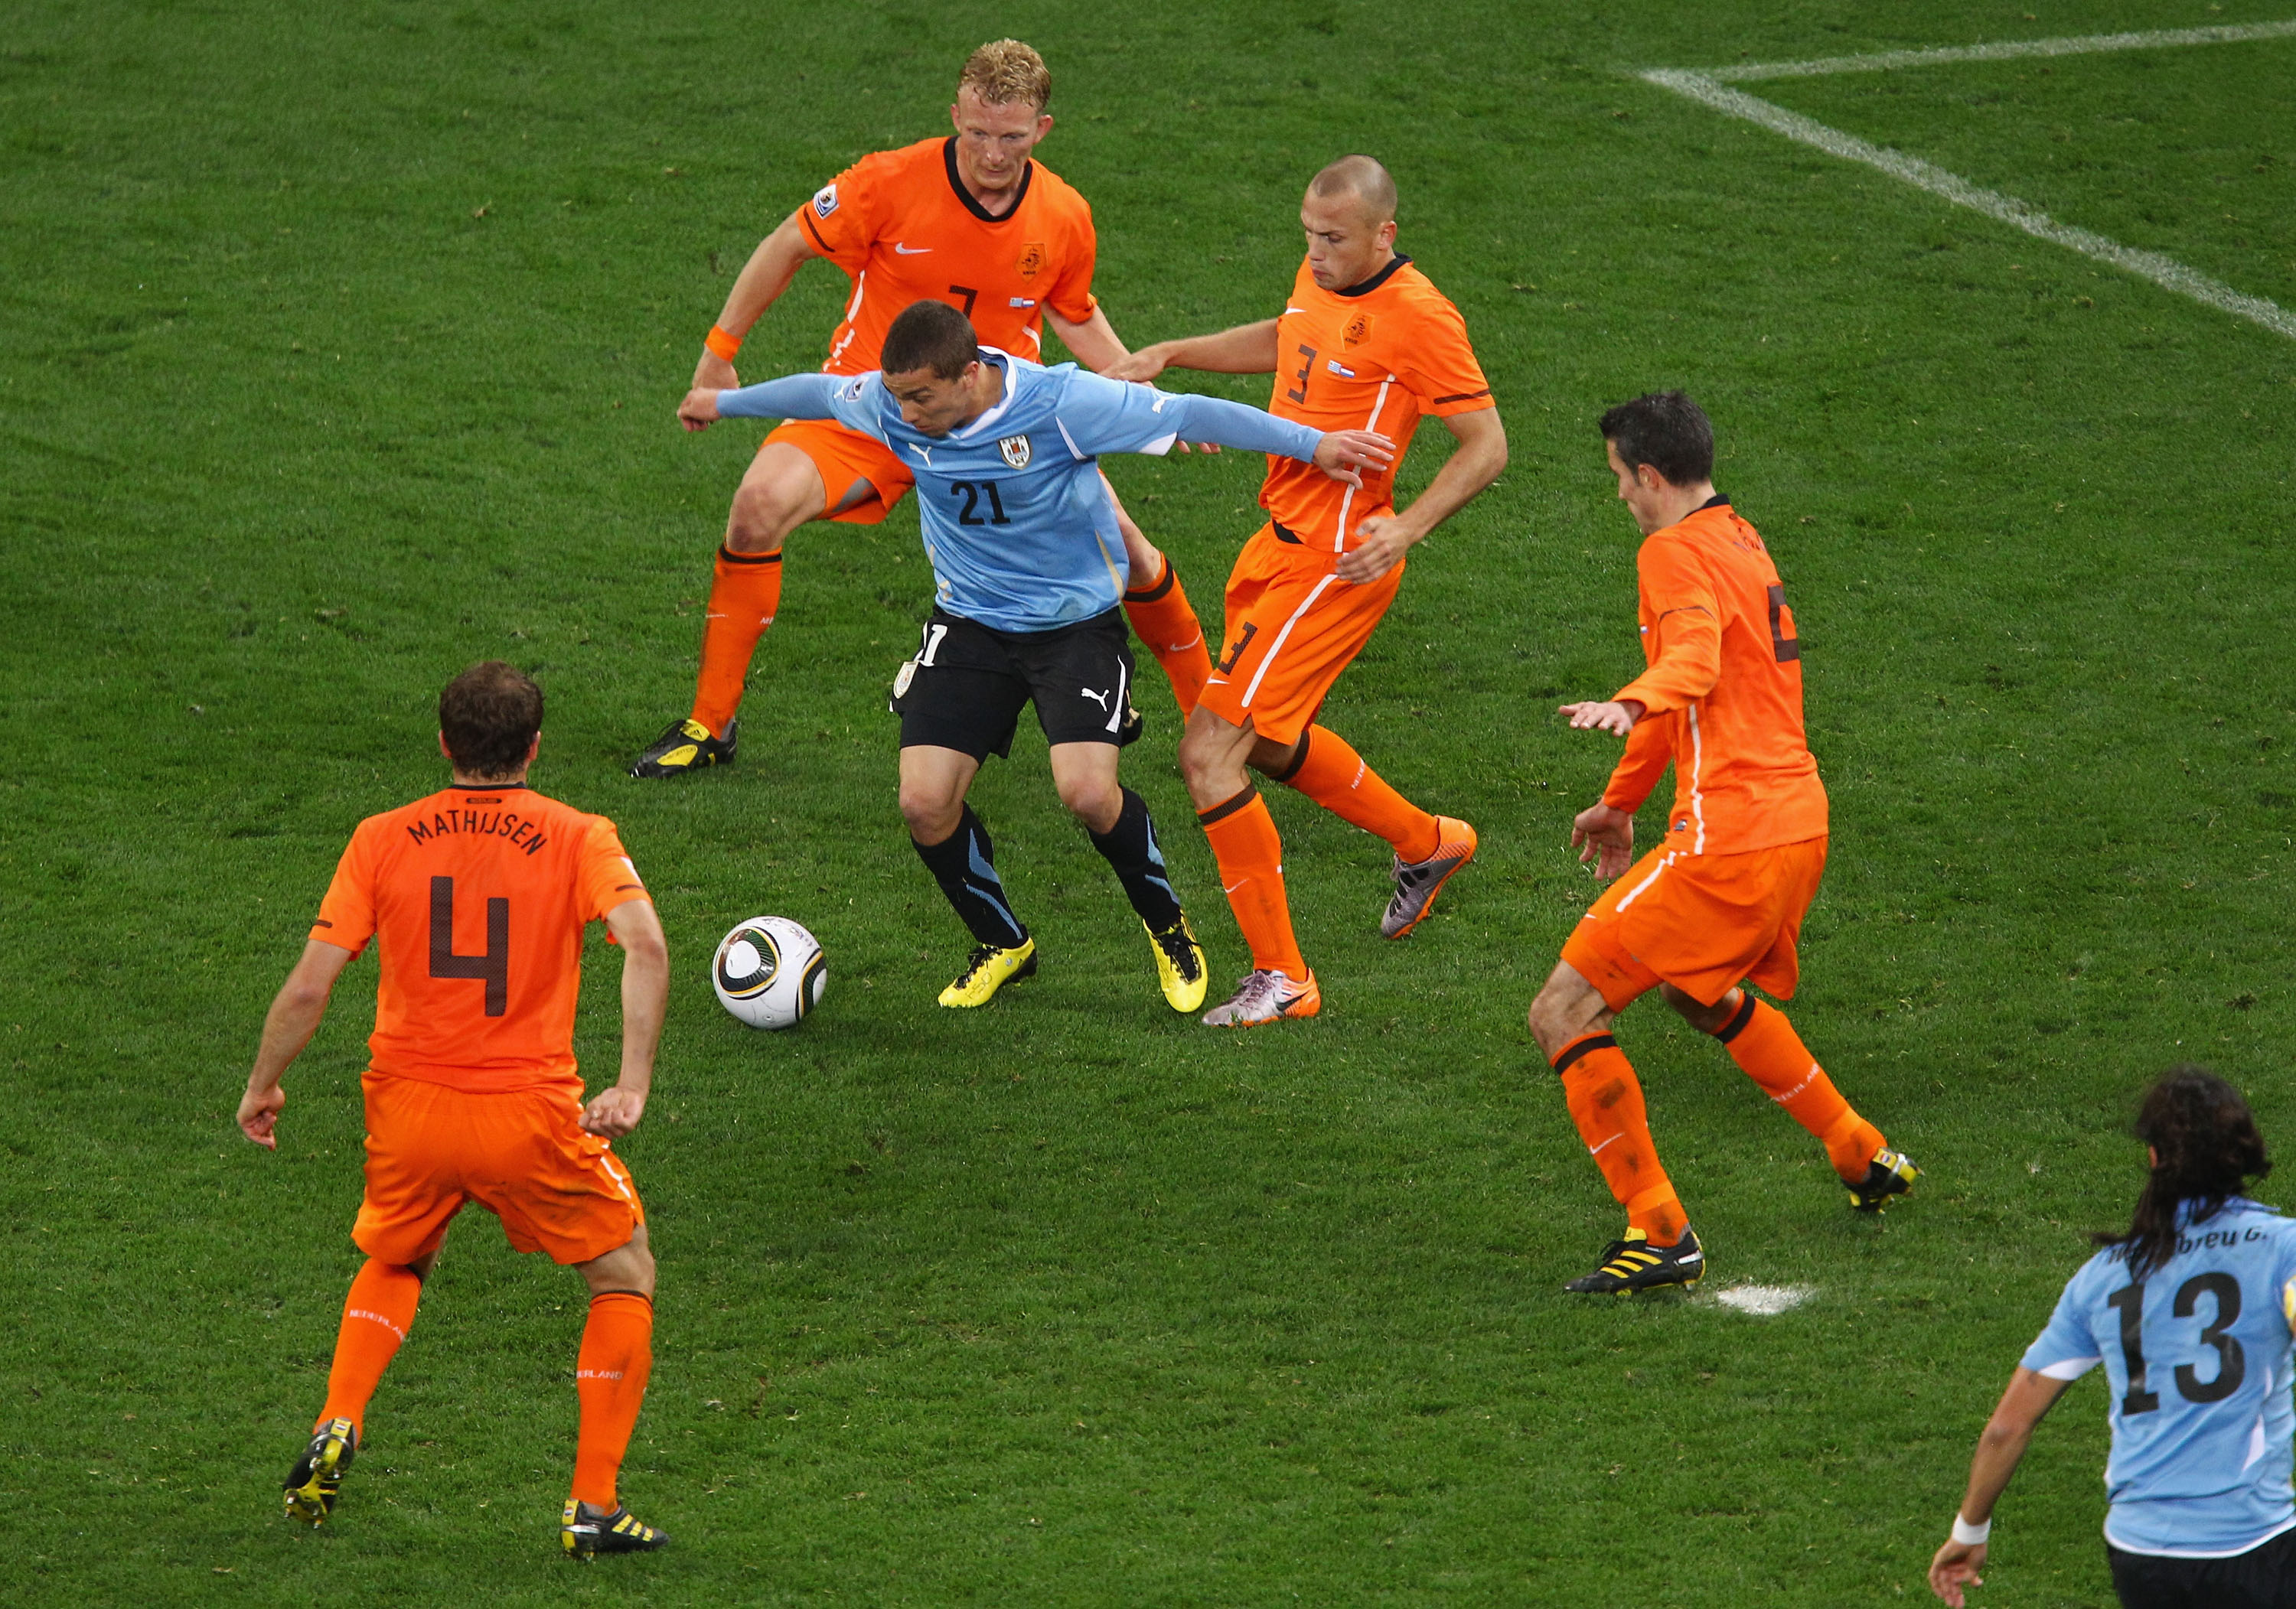 CAPE TOWN, SOUTH AFRICA - JULY 06: Sebastian Fernandez of Uruguay is challenged by the Netherlands defence during the 2010 FIFA World Cup South Africa Semi Final match between Uruguay and the Netherlands at Green Point Stadium on July 6, 2010 in Cape Town